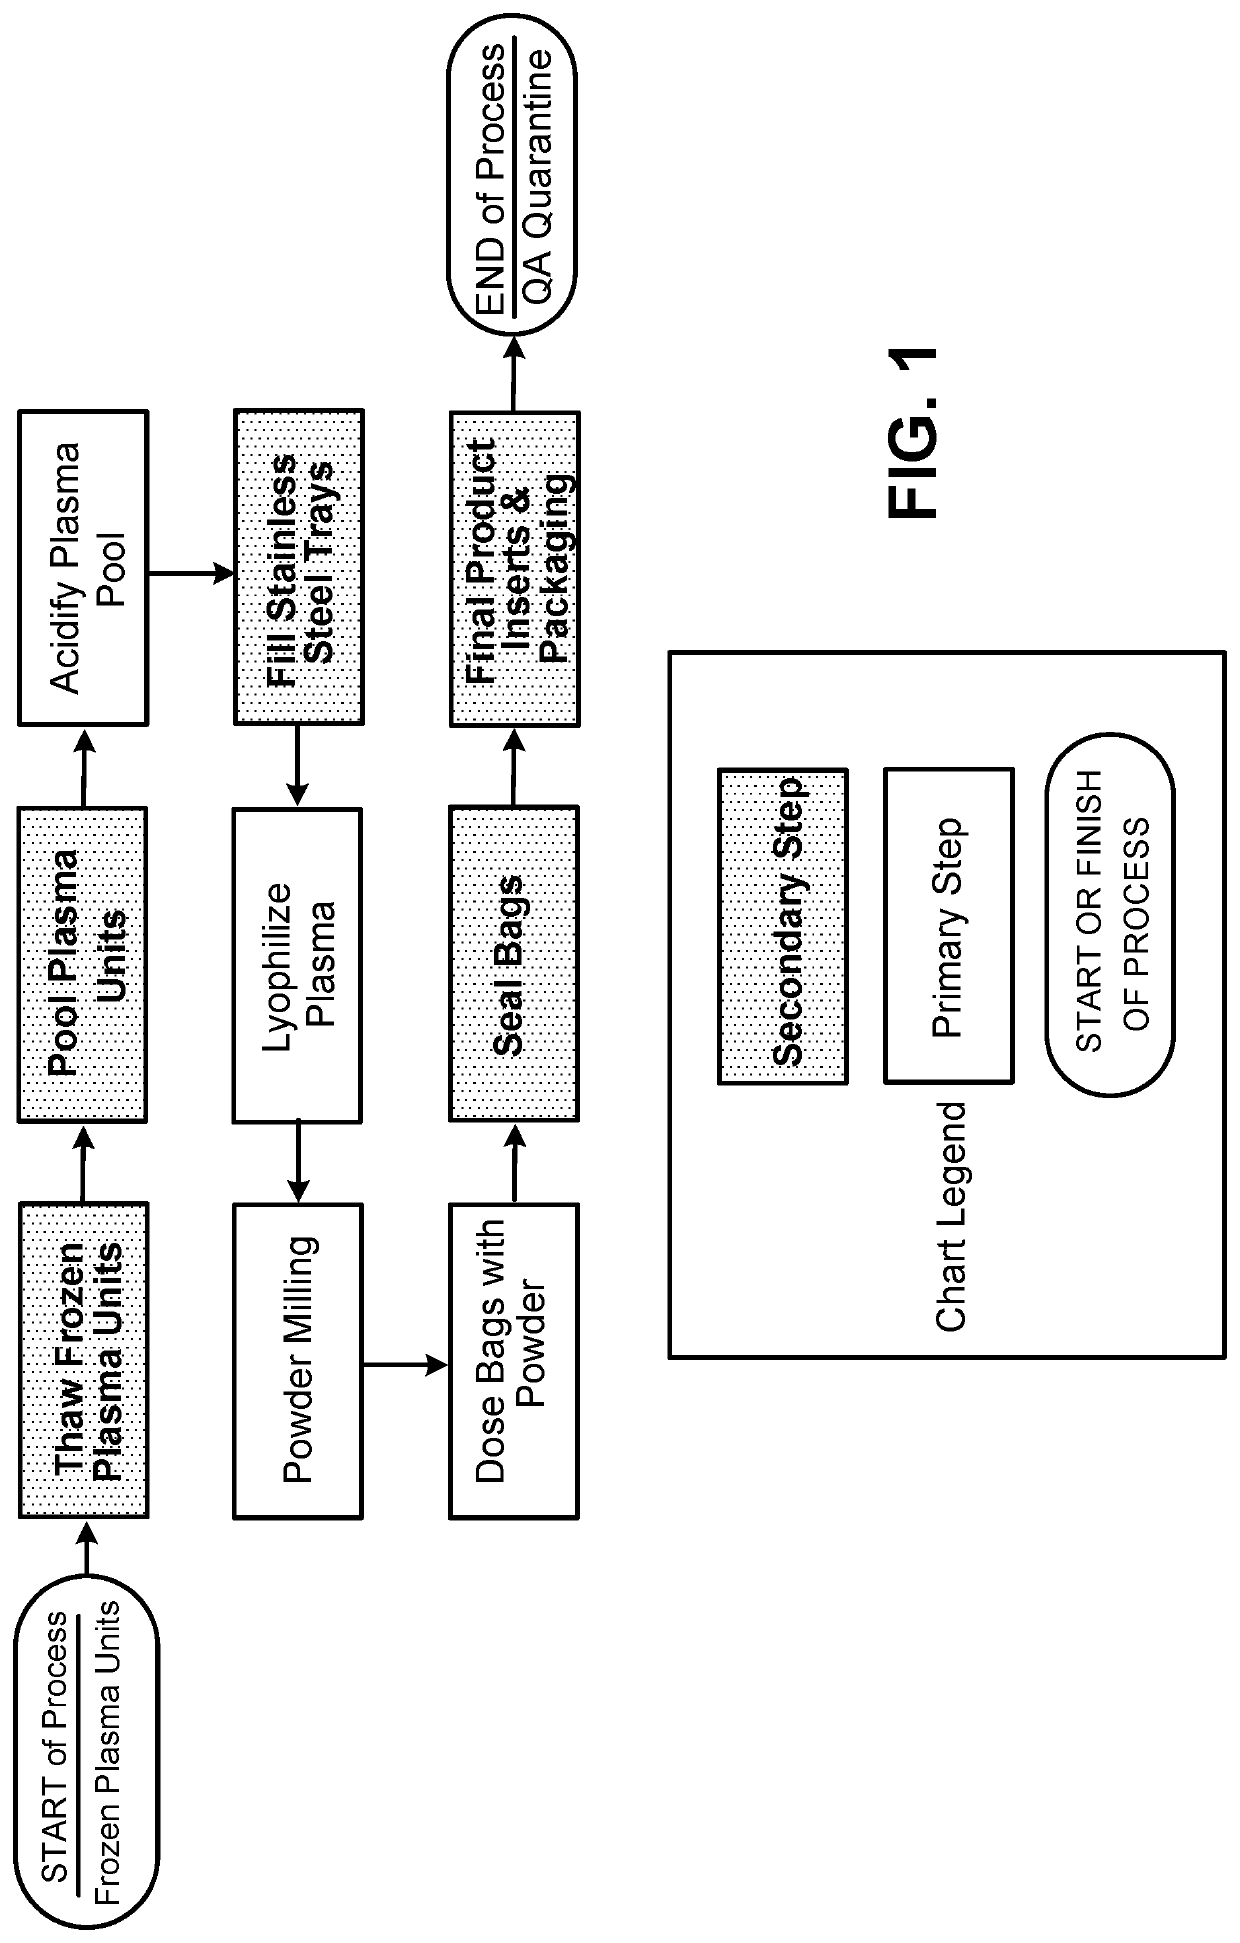 Materials and methods for blood plasma preparations